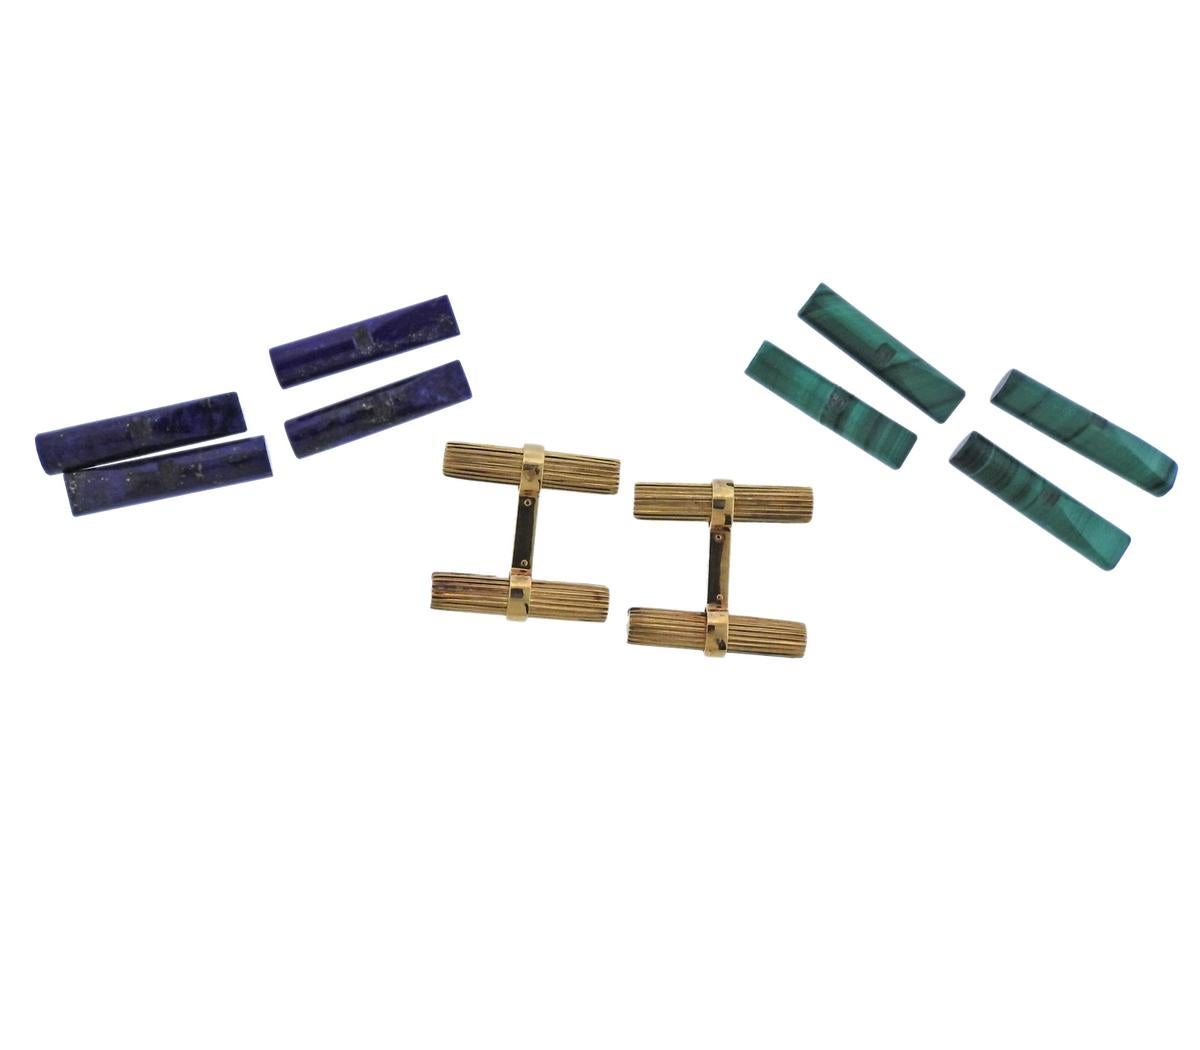 Interchangeable 18k yellow gold French Cartier cufflinks set, featuring lapis and malachite top versions. Cufflink top measures 21mm x 6mm. Weight is 10.4 grams (gold cufflinks only, without stones). Marked French gold assay marks, Cartier, 750,